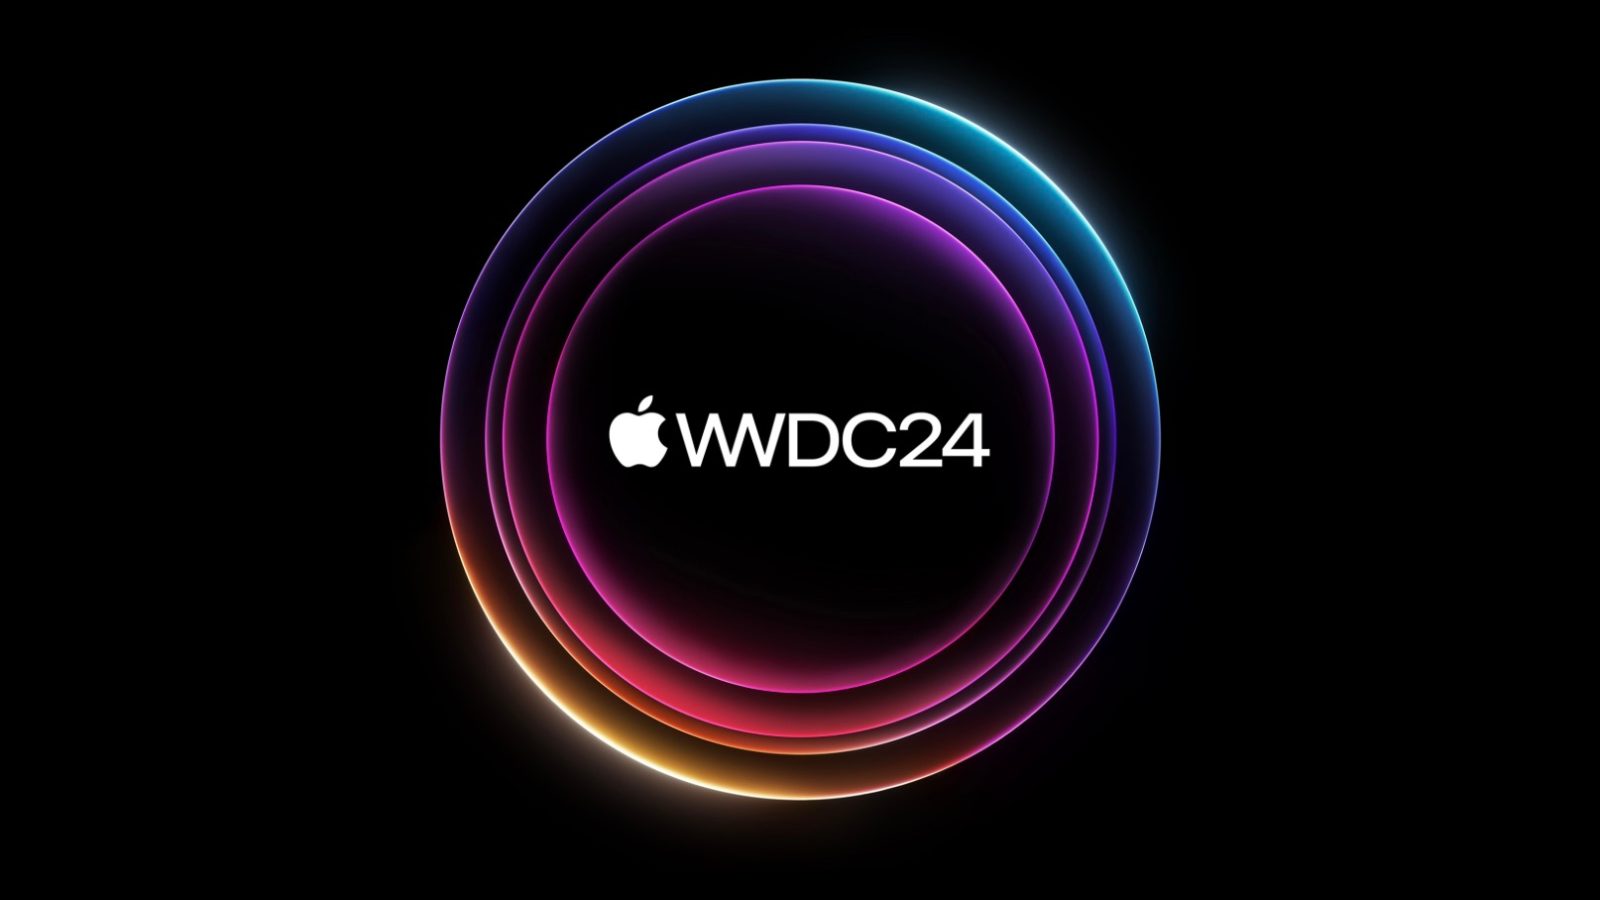 Apple Preps for WWDC 2024 with Keynote Stream Placeholder on YouTube